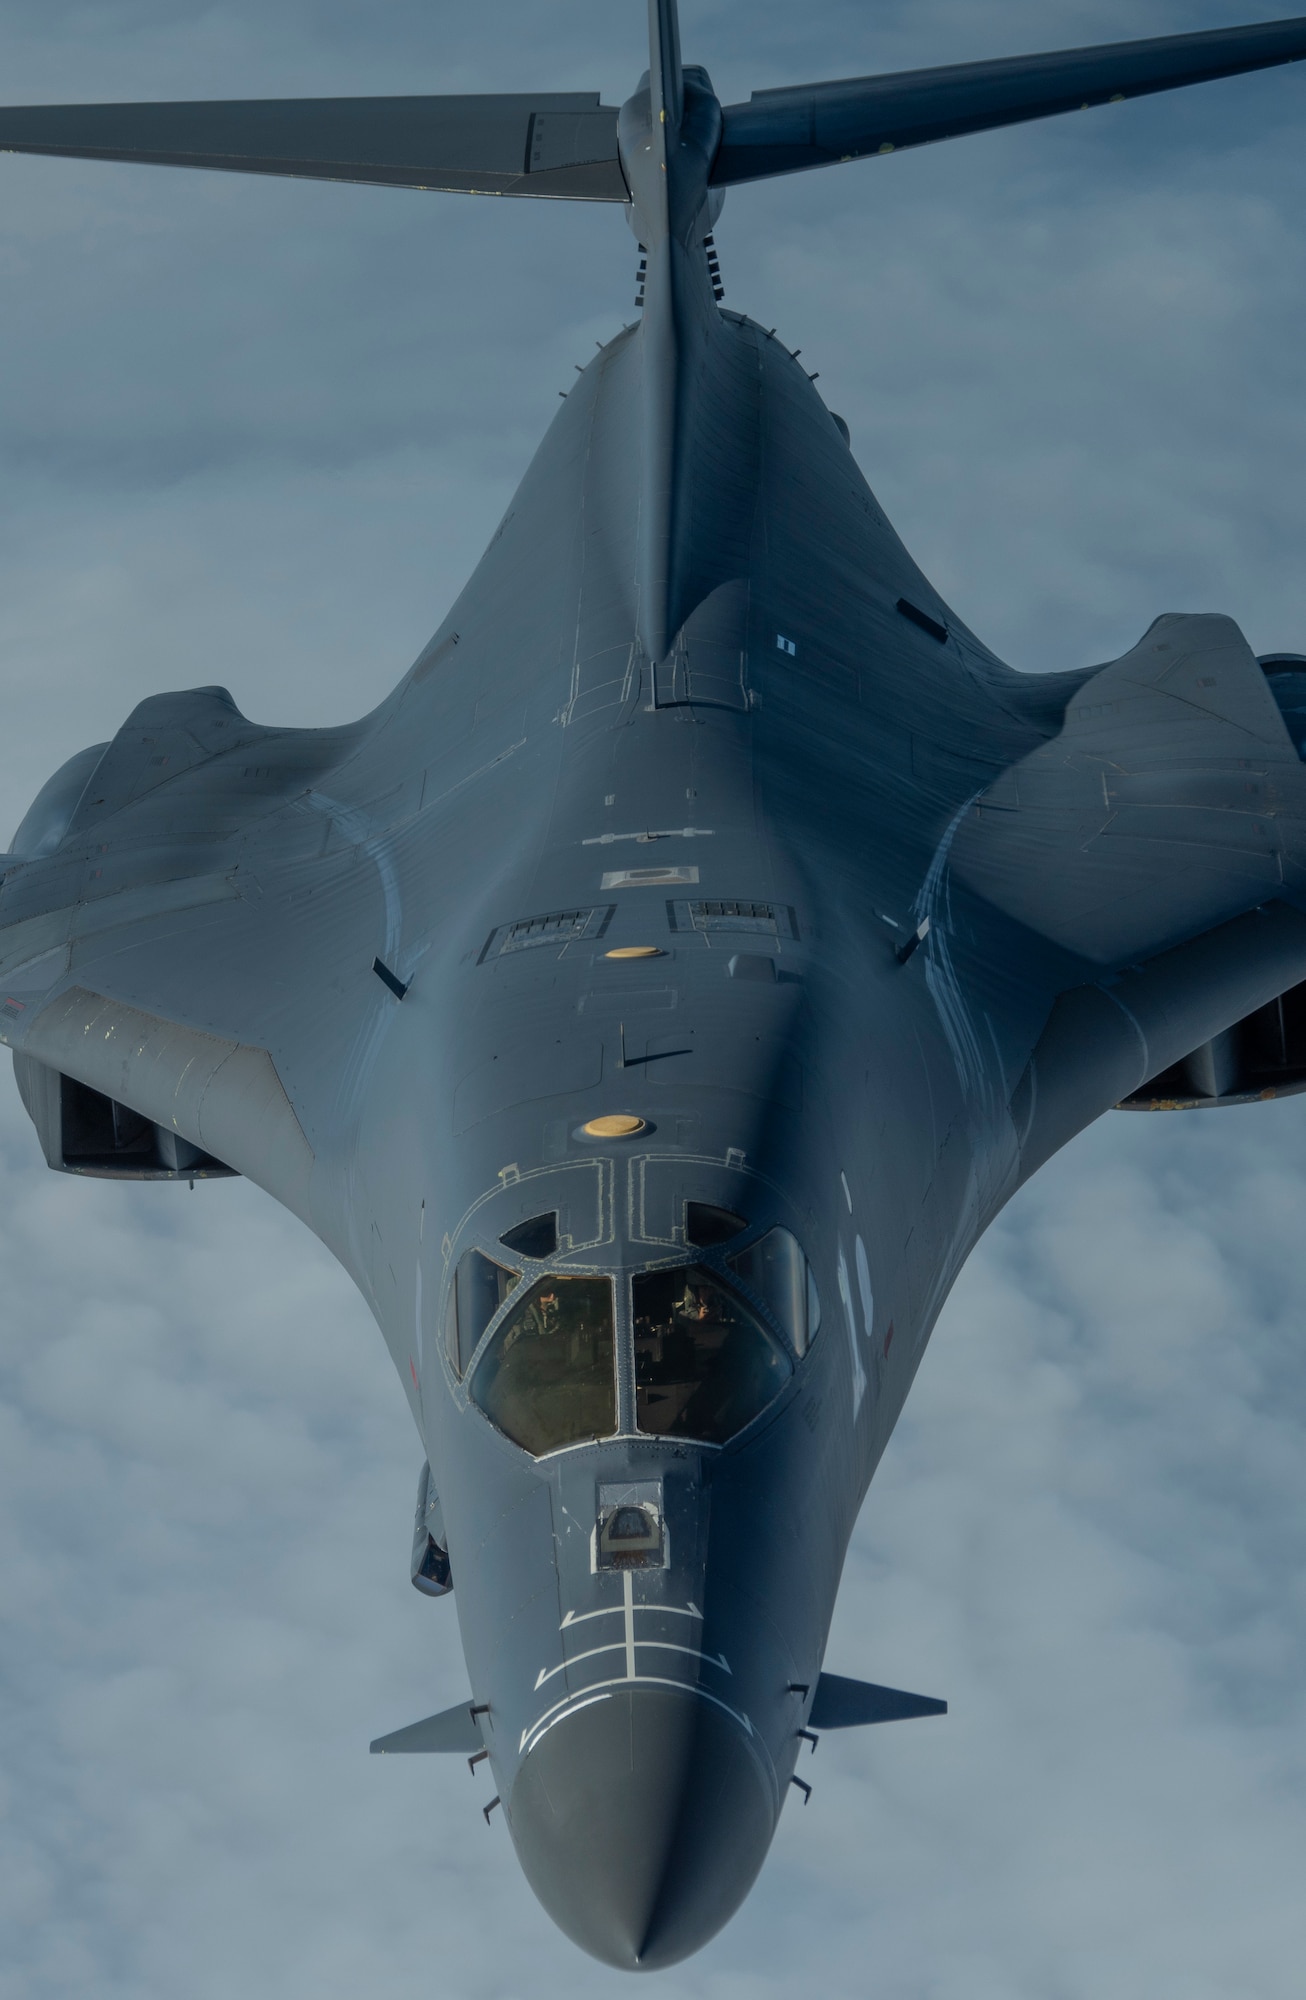 A 9th Expeditionary Bomb Squadron B-1B Lancer conducts a training mission in the vicinity of Japan where they integrated with Japan Air Self Defense Force assets, May 12, 2020. The 9th EBS is deployed to Andersen Air Force Base, Guam, as part of a Bomber Task Force and is supporting Pacific Air Forces’ strategic deterrence missions and  commitment to the security and stability of the Indo-Pacific region. (U.S. Air Force photo by Senior Airman River Bruce)